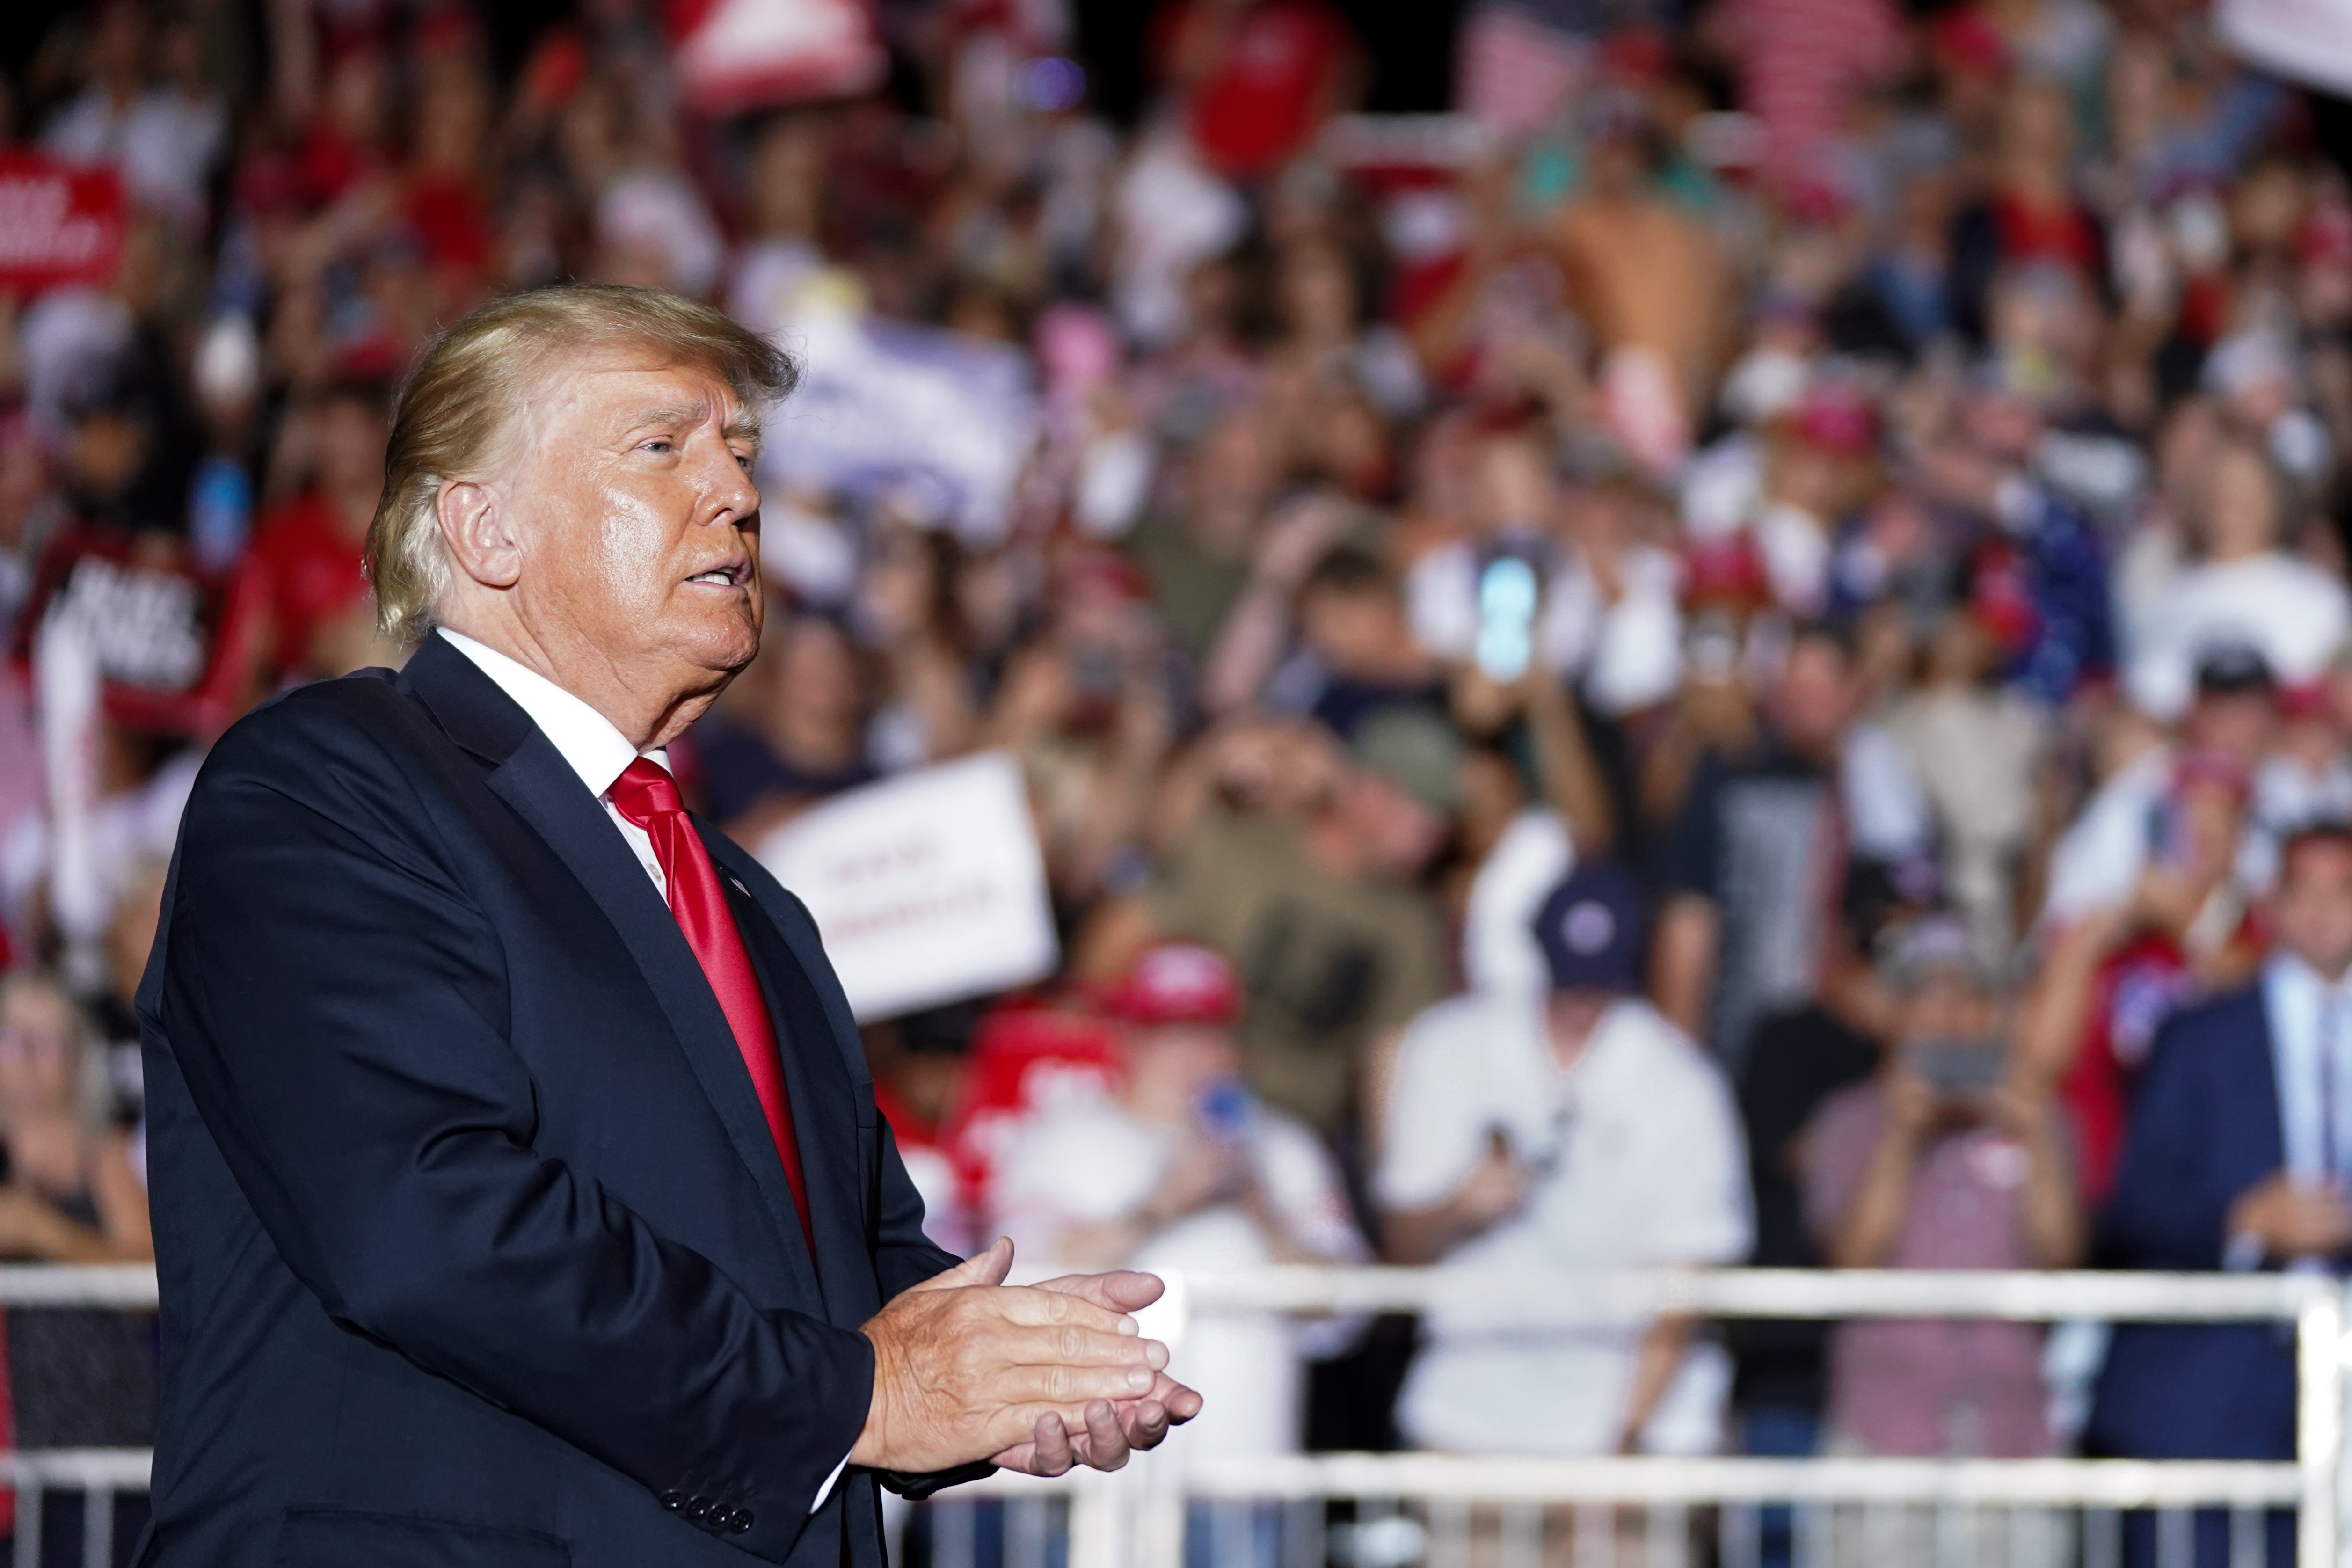 President Donald Trump walks off the stage at the end of a rally on September 25, 2021 in Perry, Georgia. (Photo by Sean Rayford/Getty Images)